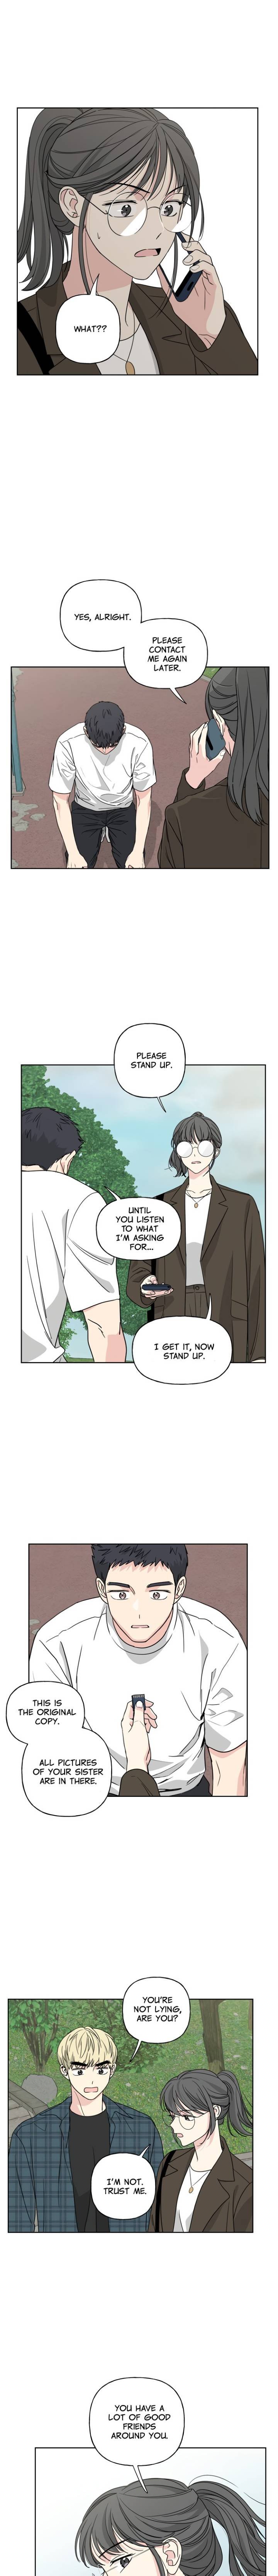 mother-im-sorry-chap-31-8